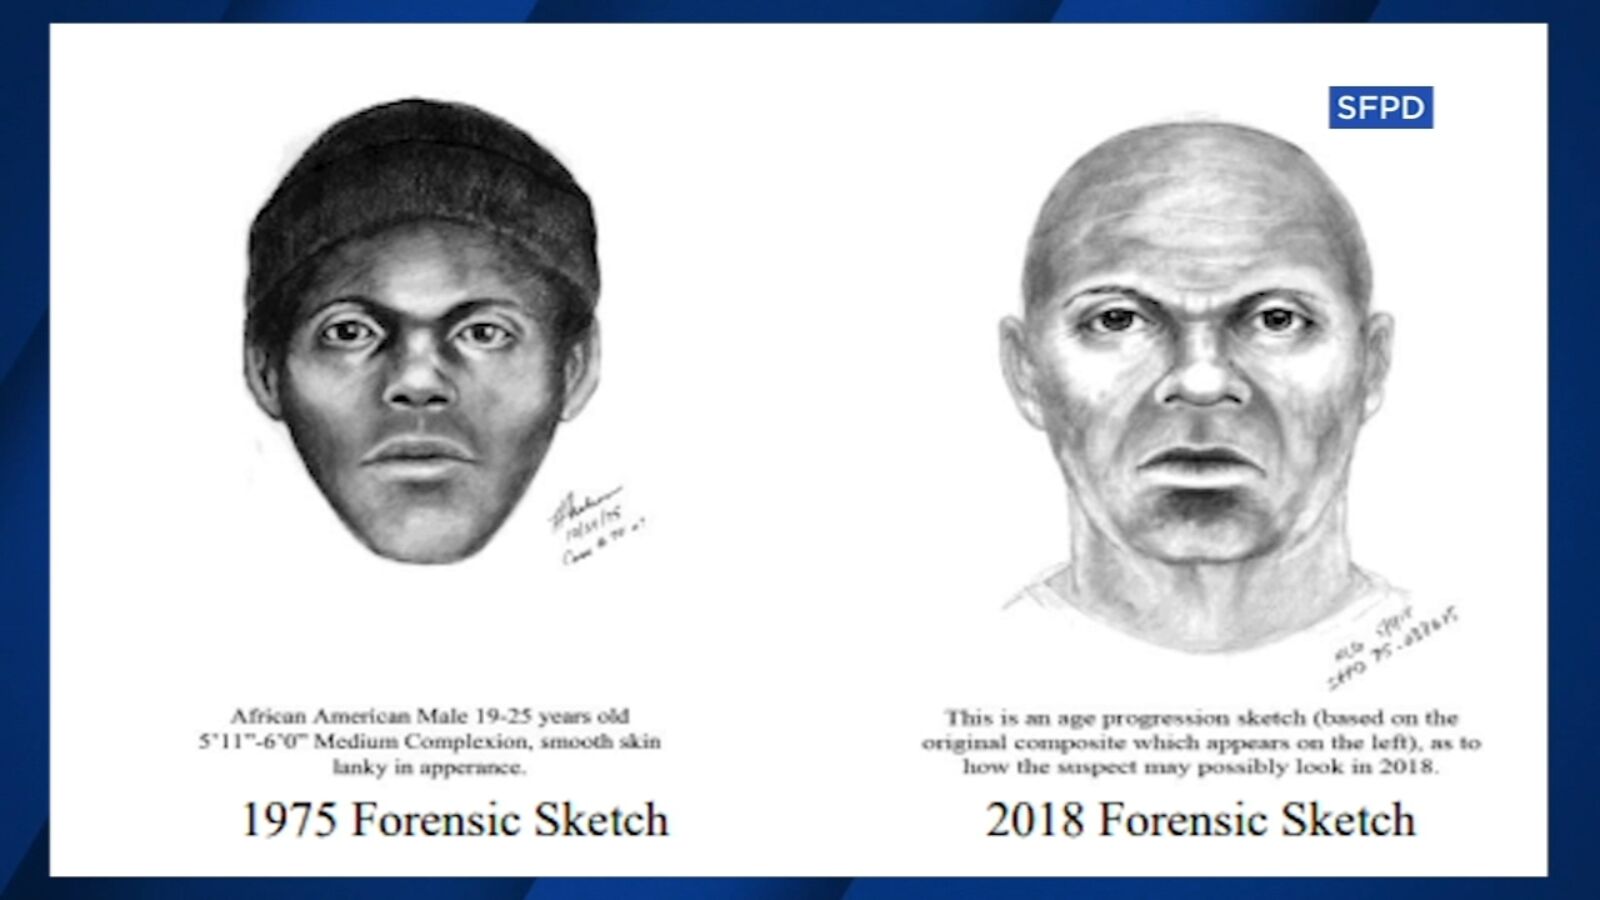 Police have released these sketches of the killer then and what he could look like now.